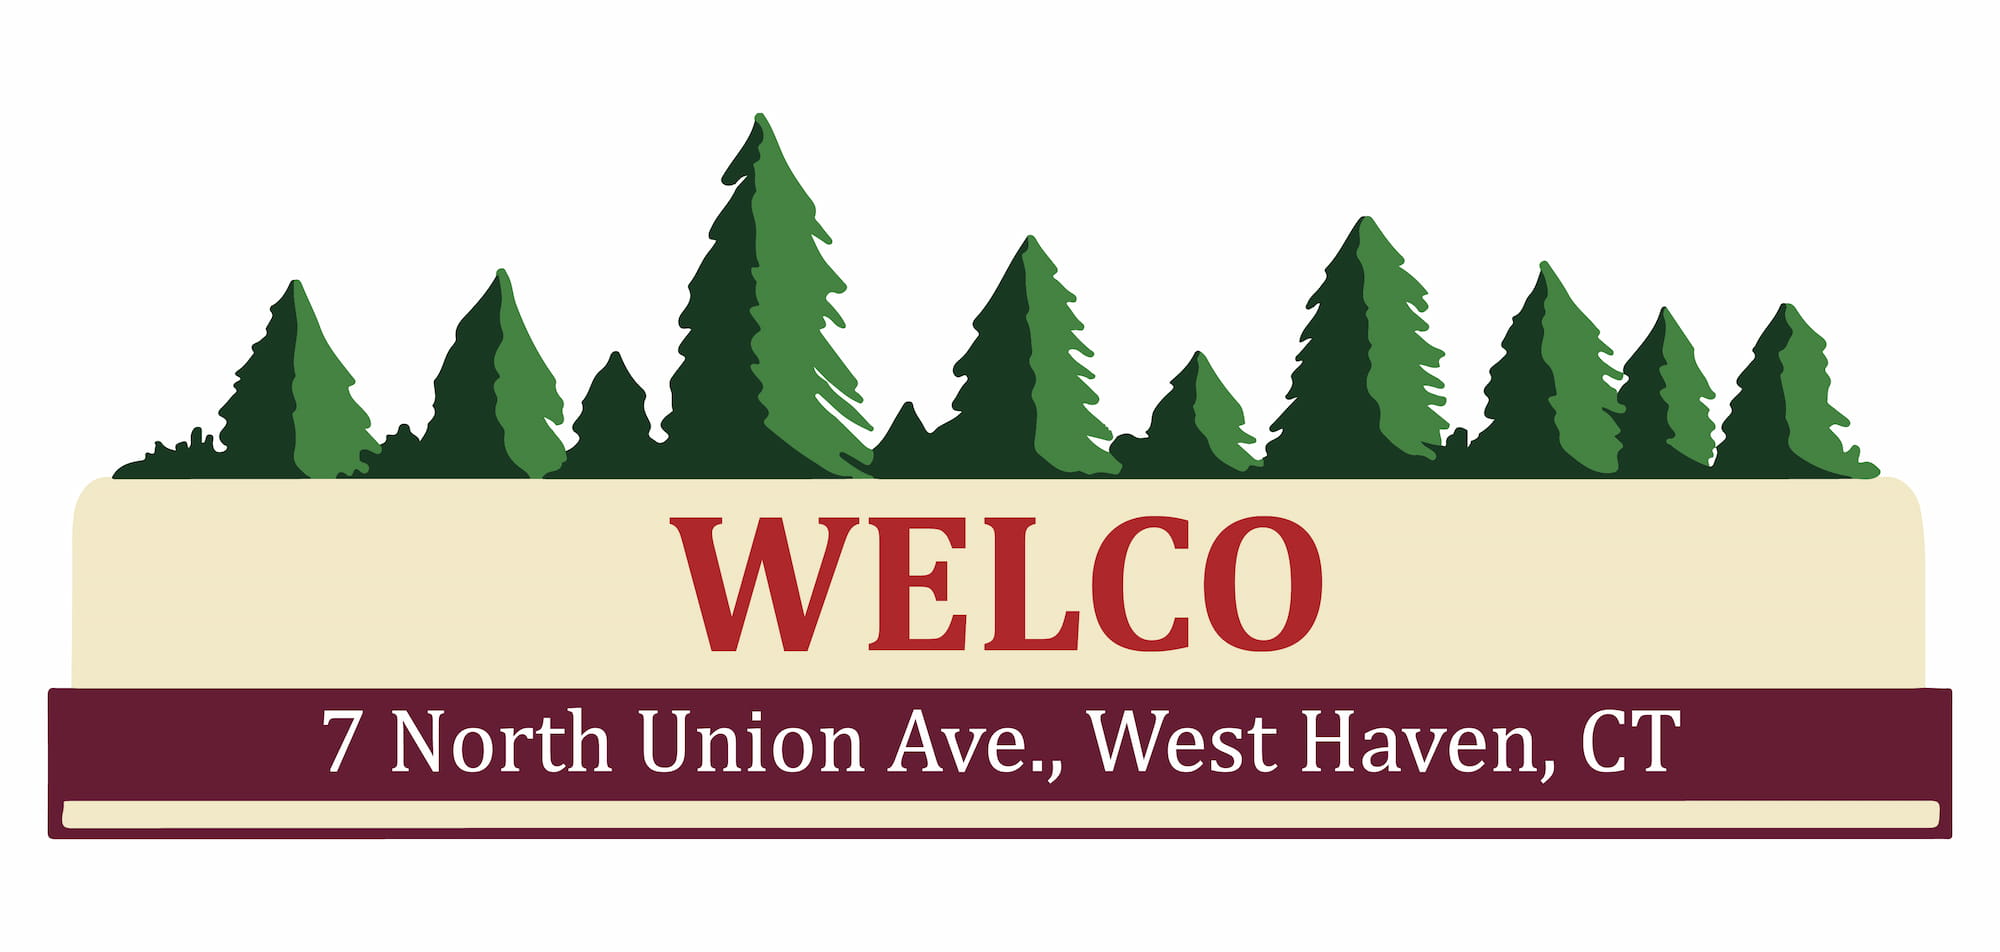 new logo fro Welco